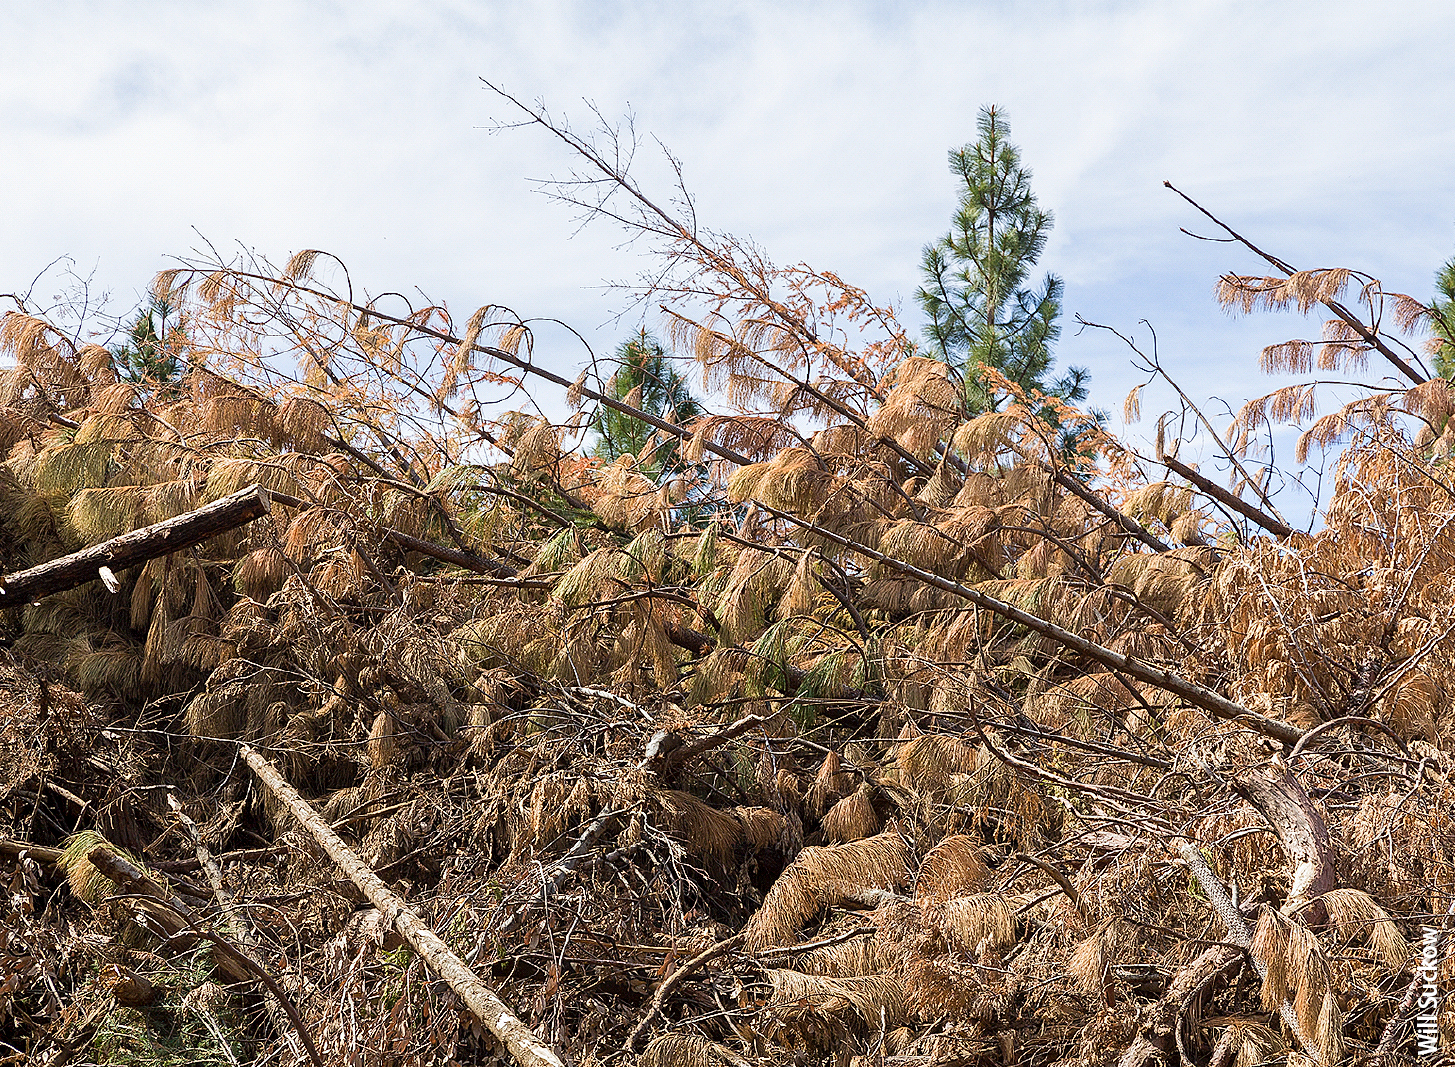 Forest slash is piled following a thinning treatment at the UC Blodgett Forest Research Station in El Dorado County.